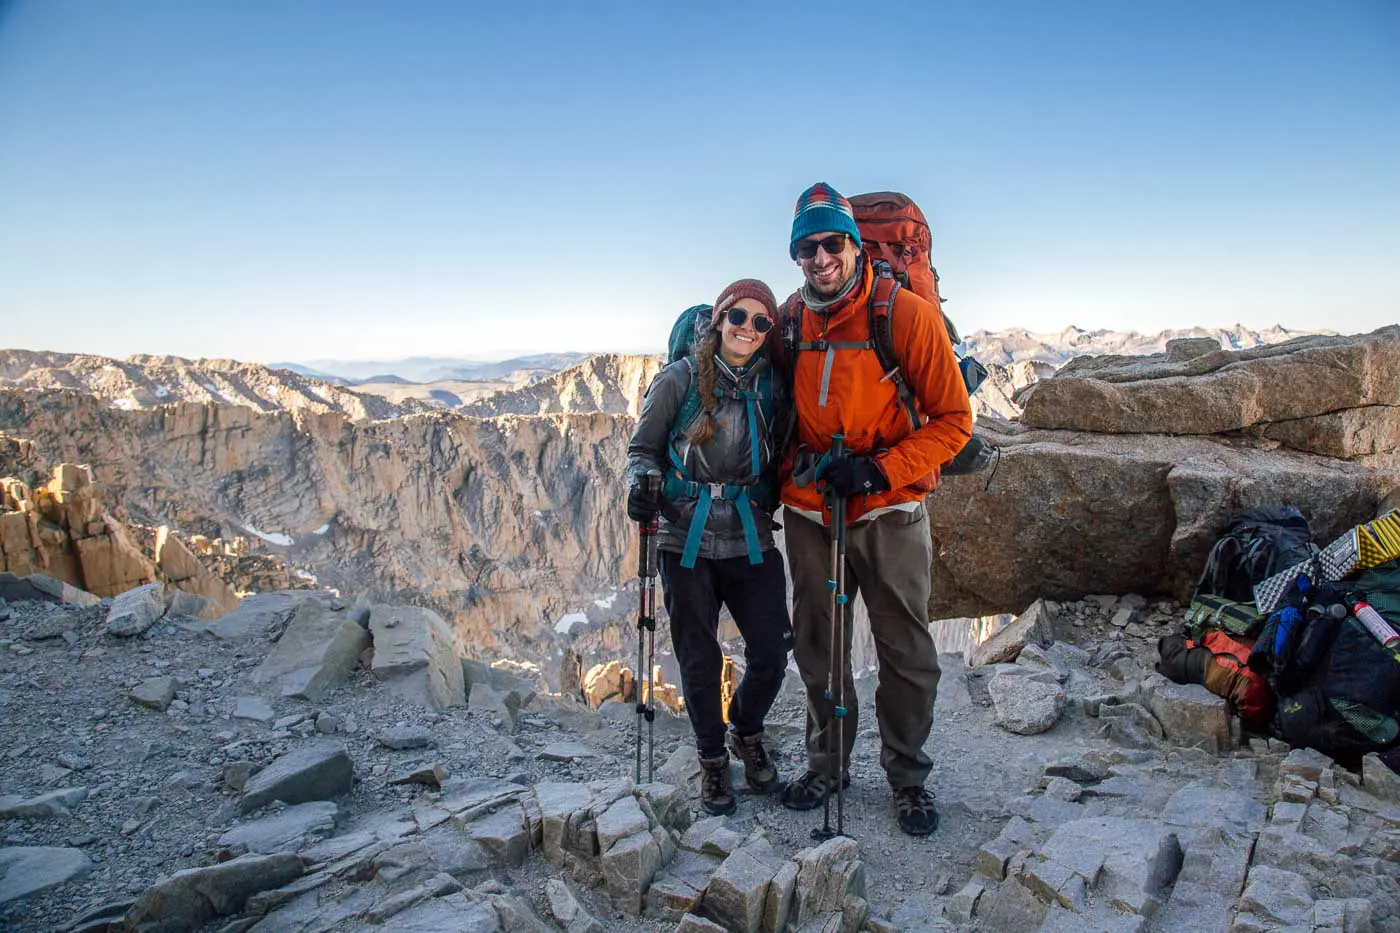 Megan and Michael wearing backpacking packs in the mountains